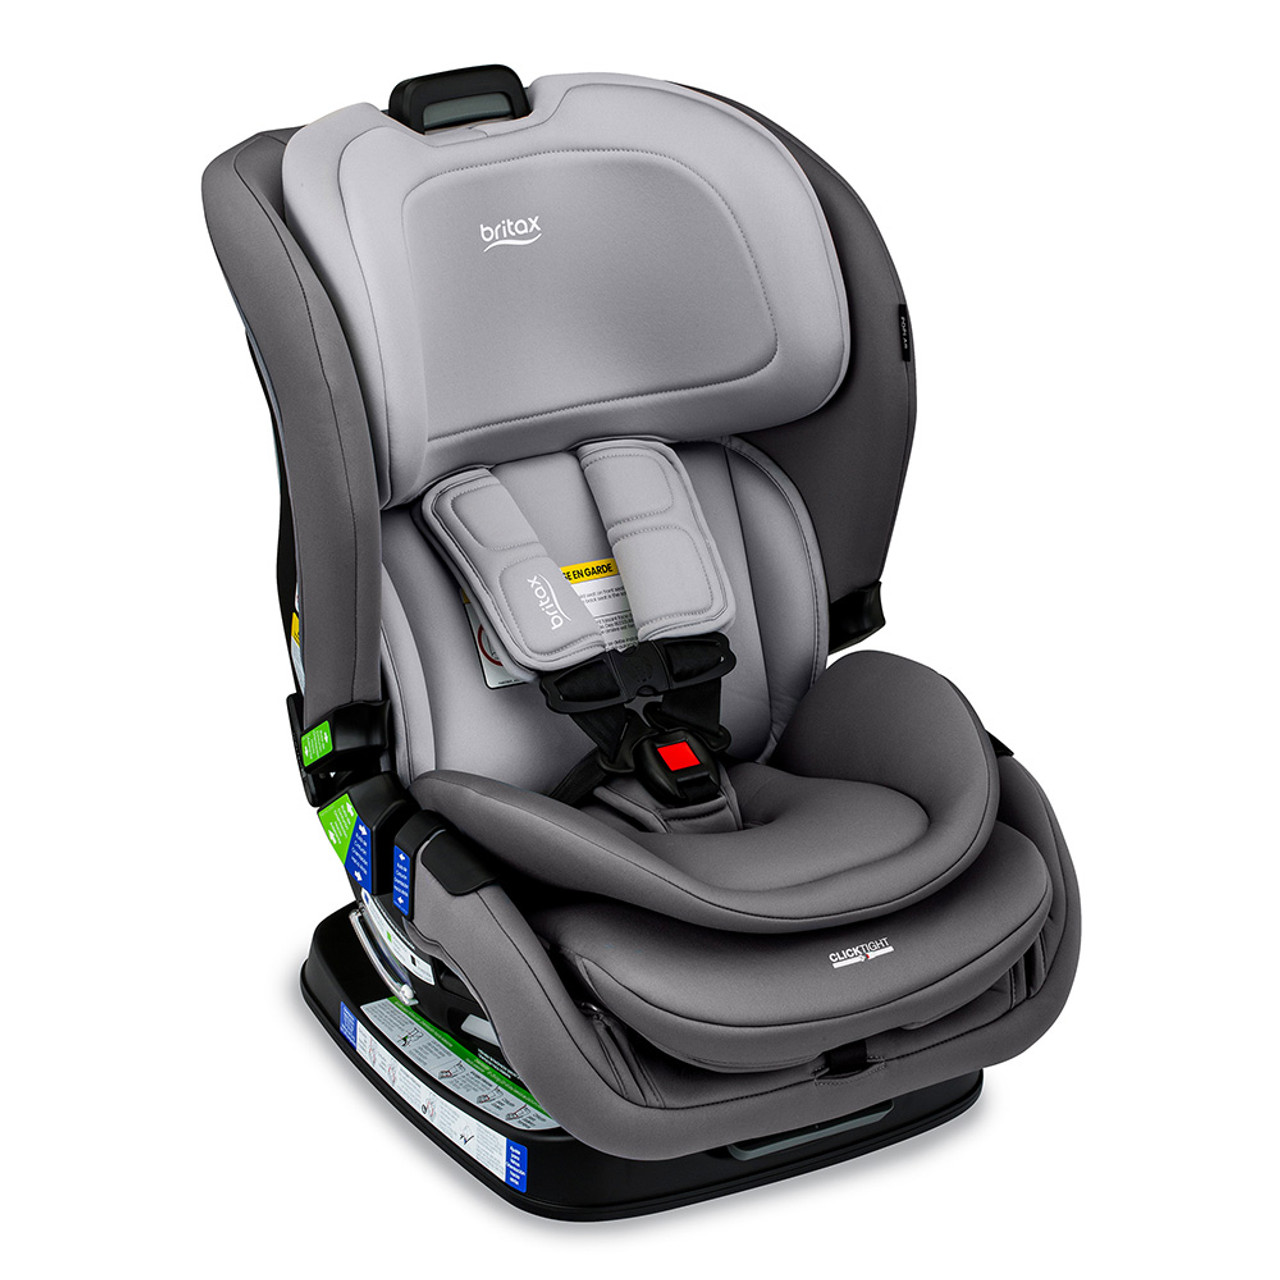 Our review of the Britax and Nuna convertible car seats